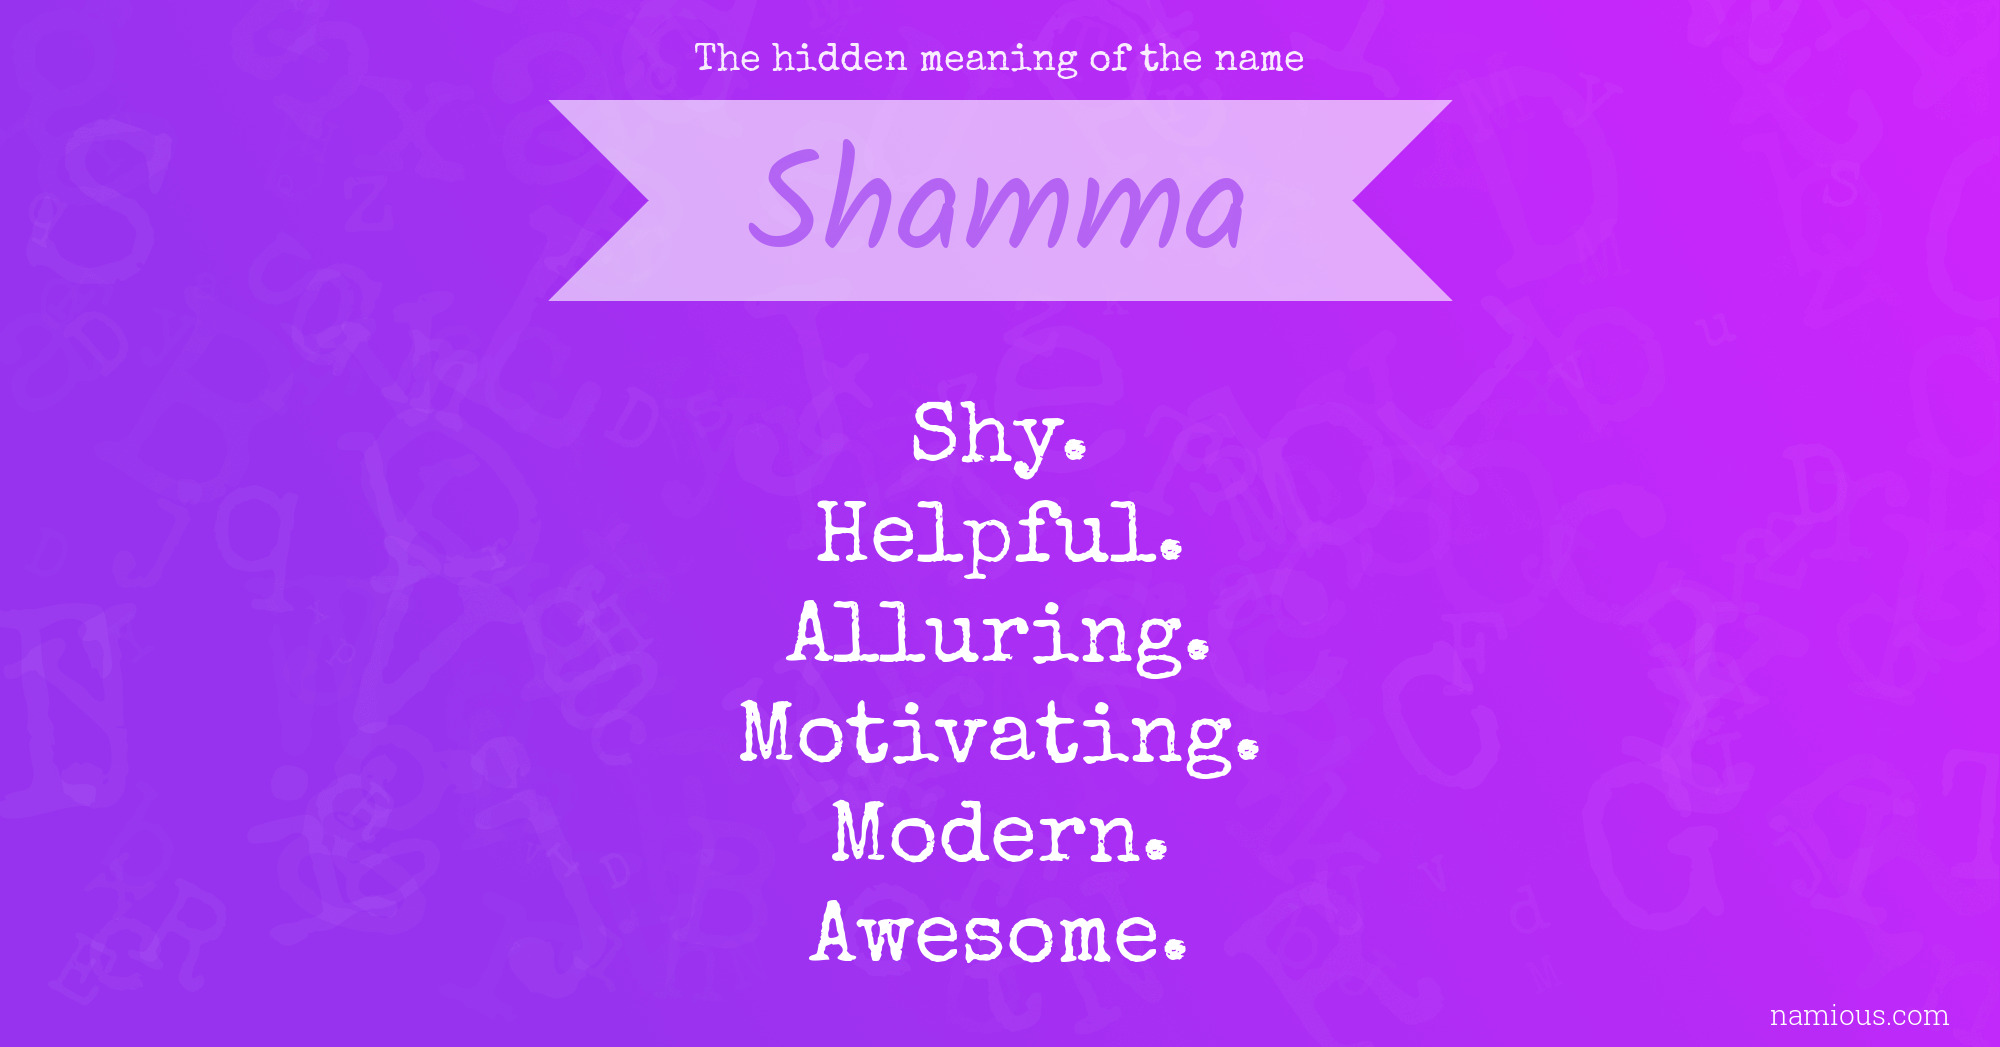 The hidden meaning of the name Shamma